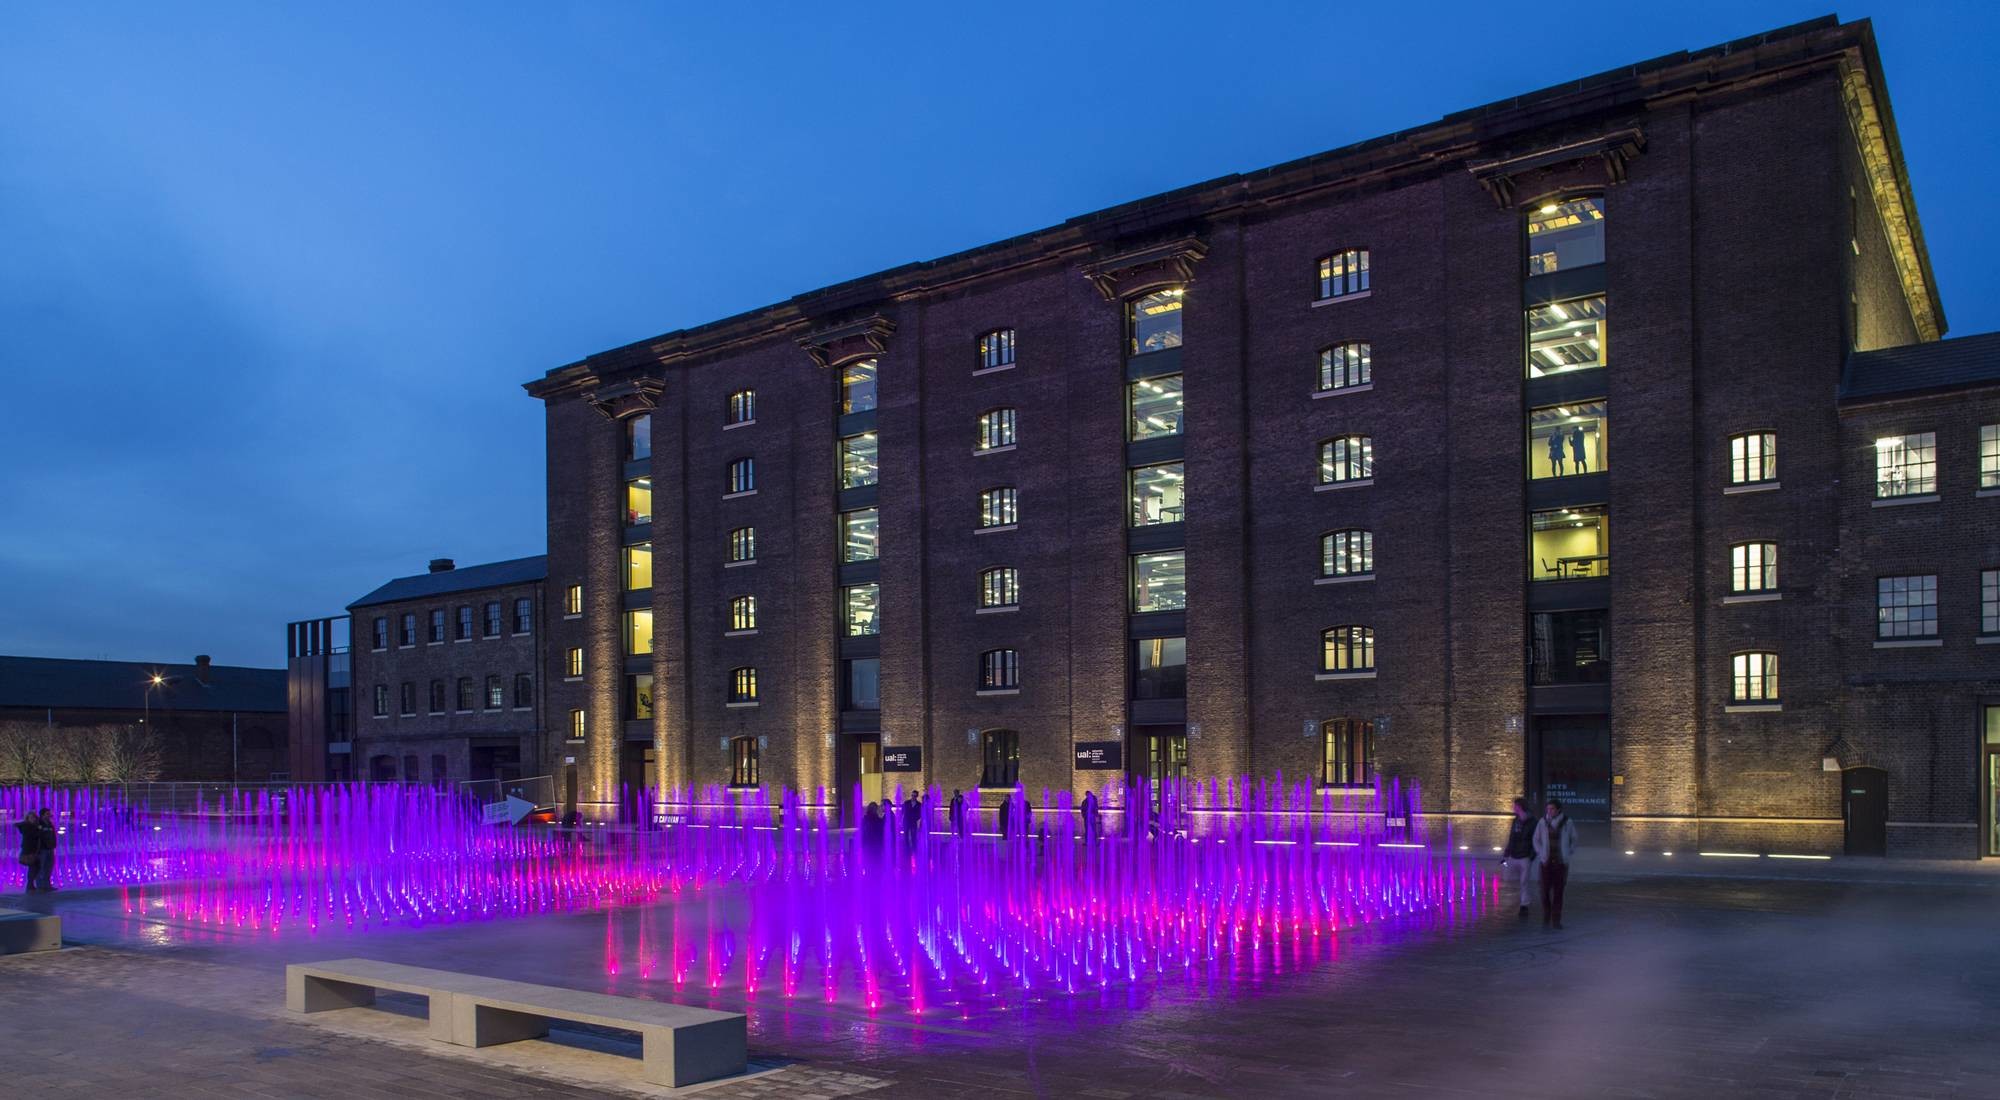 Central Saint Martins by night